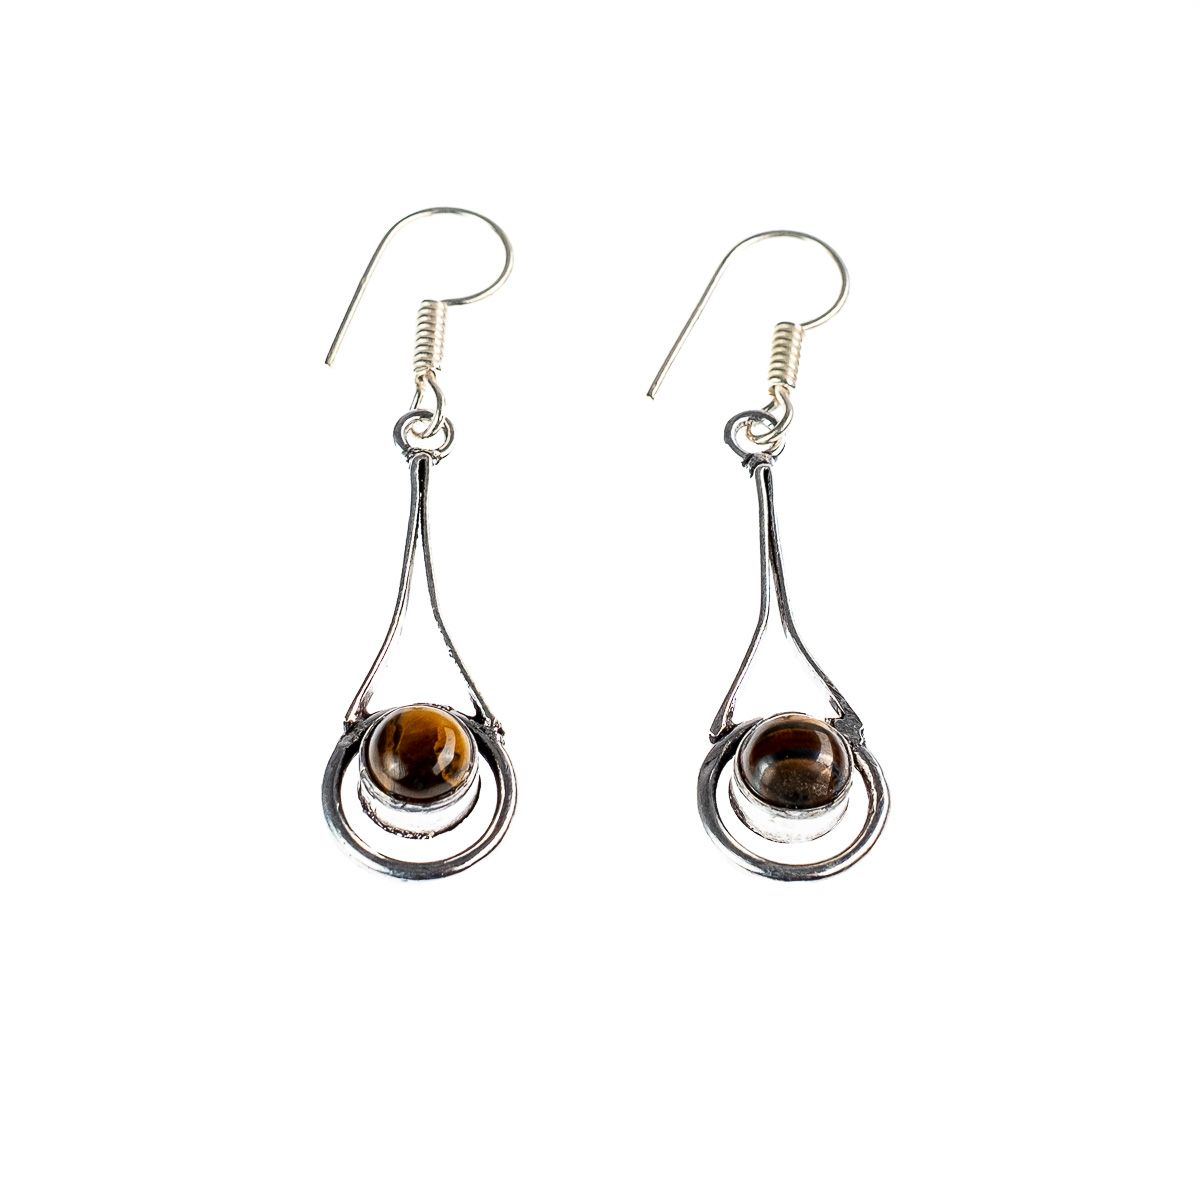 German silver earrings Dilshad - tiger eye India